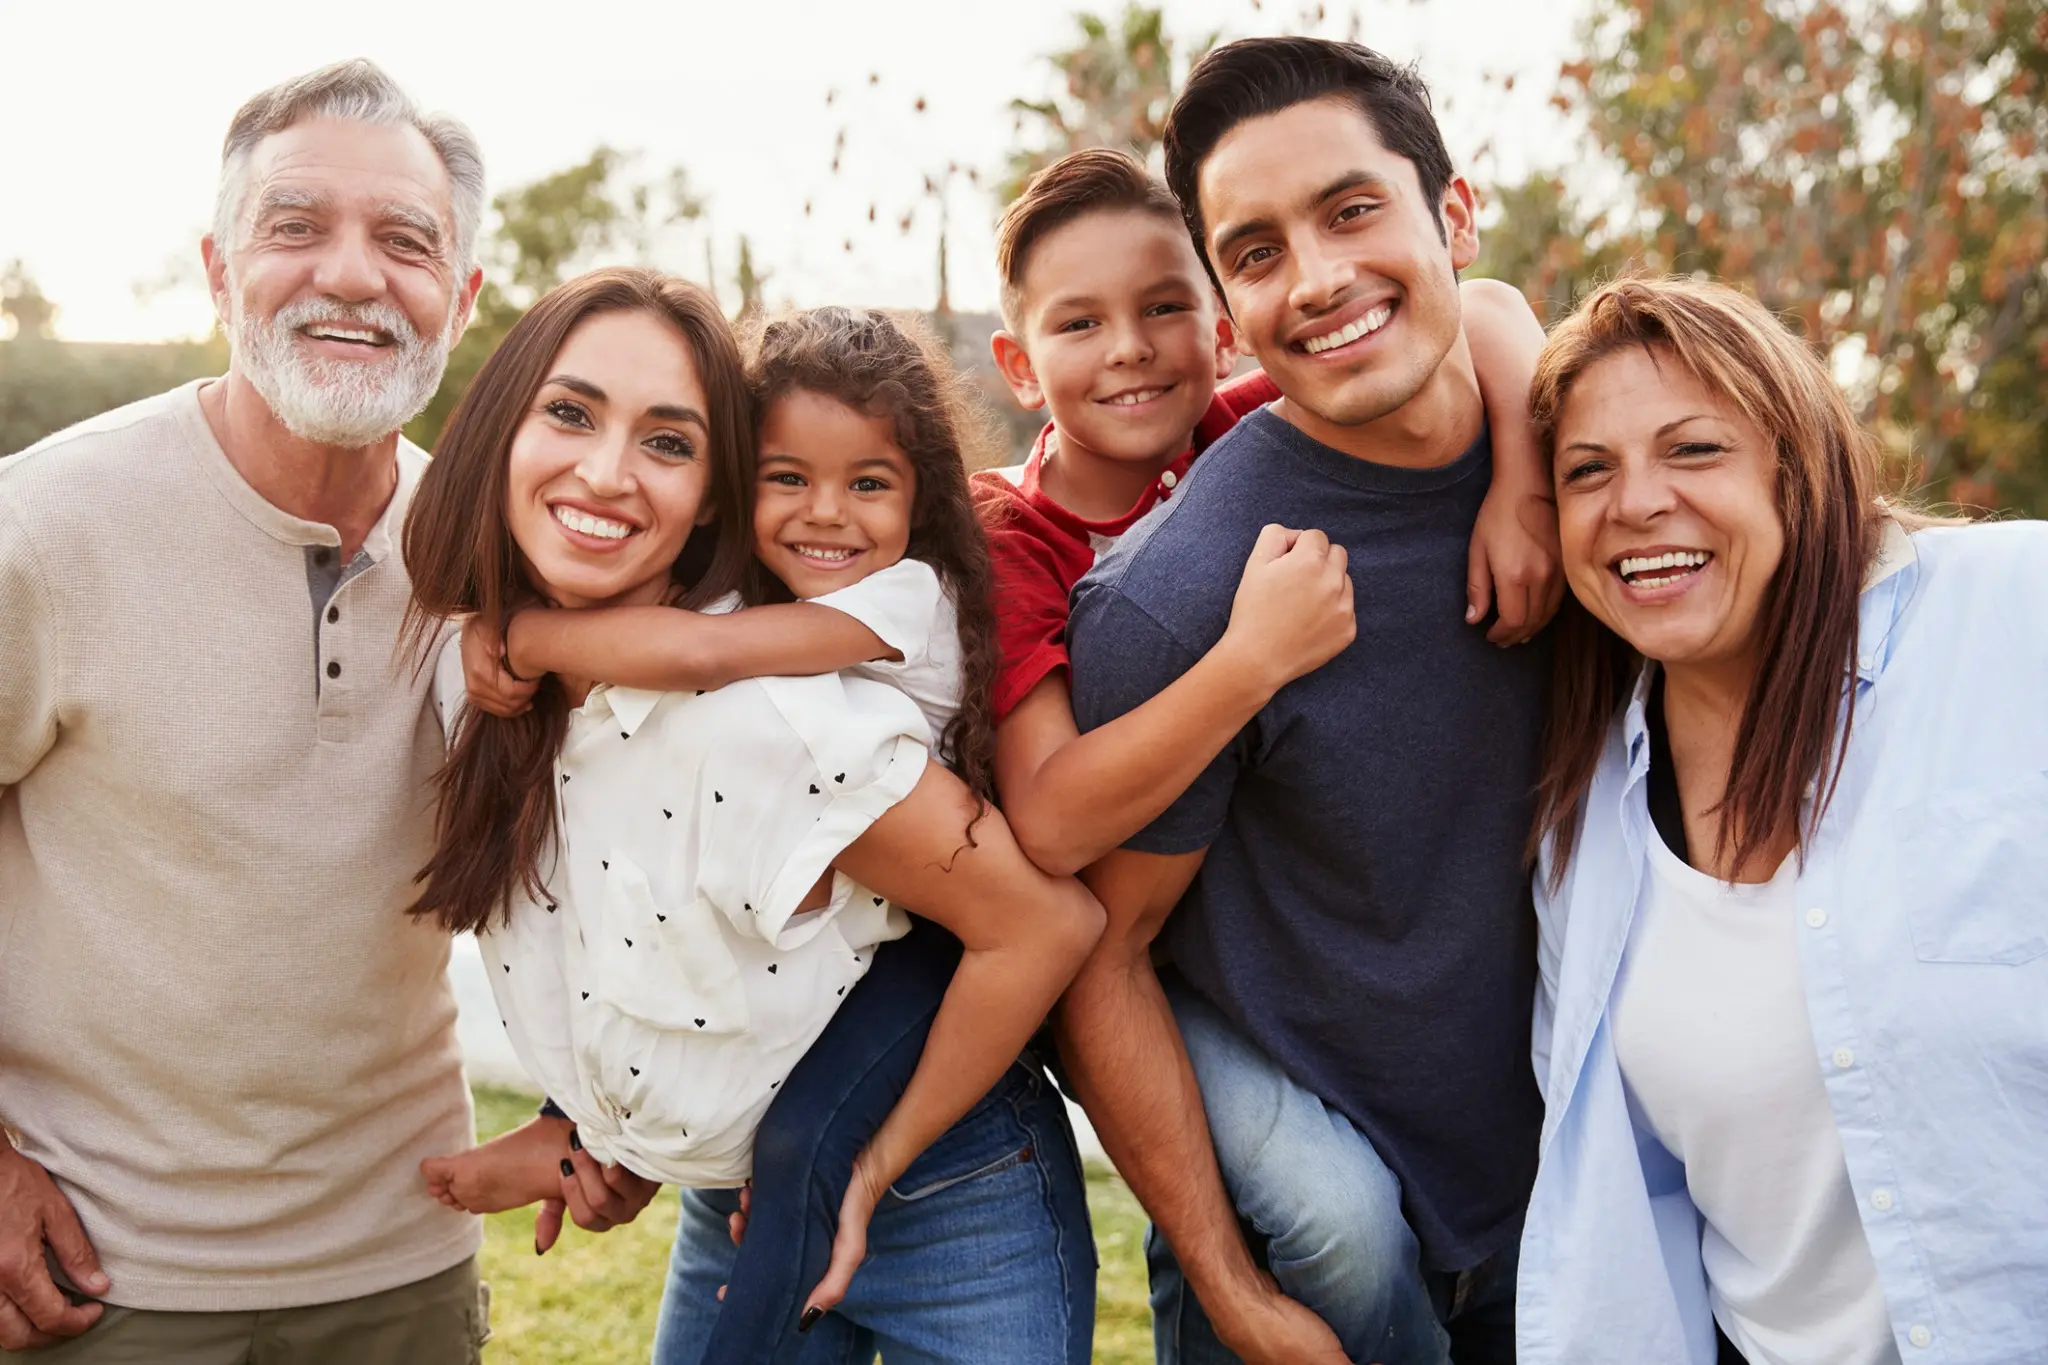 Chaparral Smiles Dental offering affordable family dentistry in Calgary making the family happy